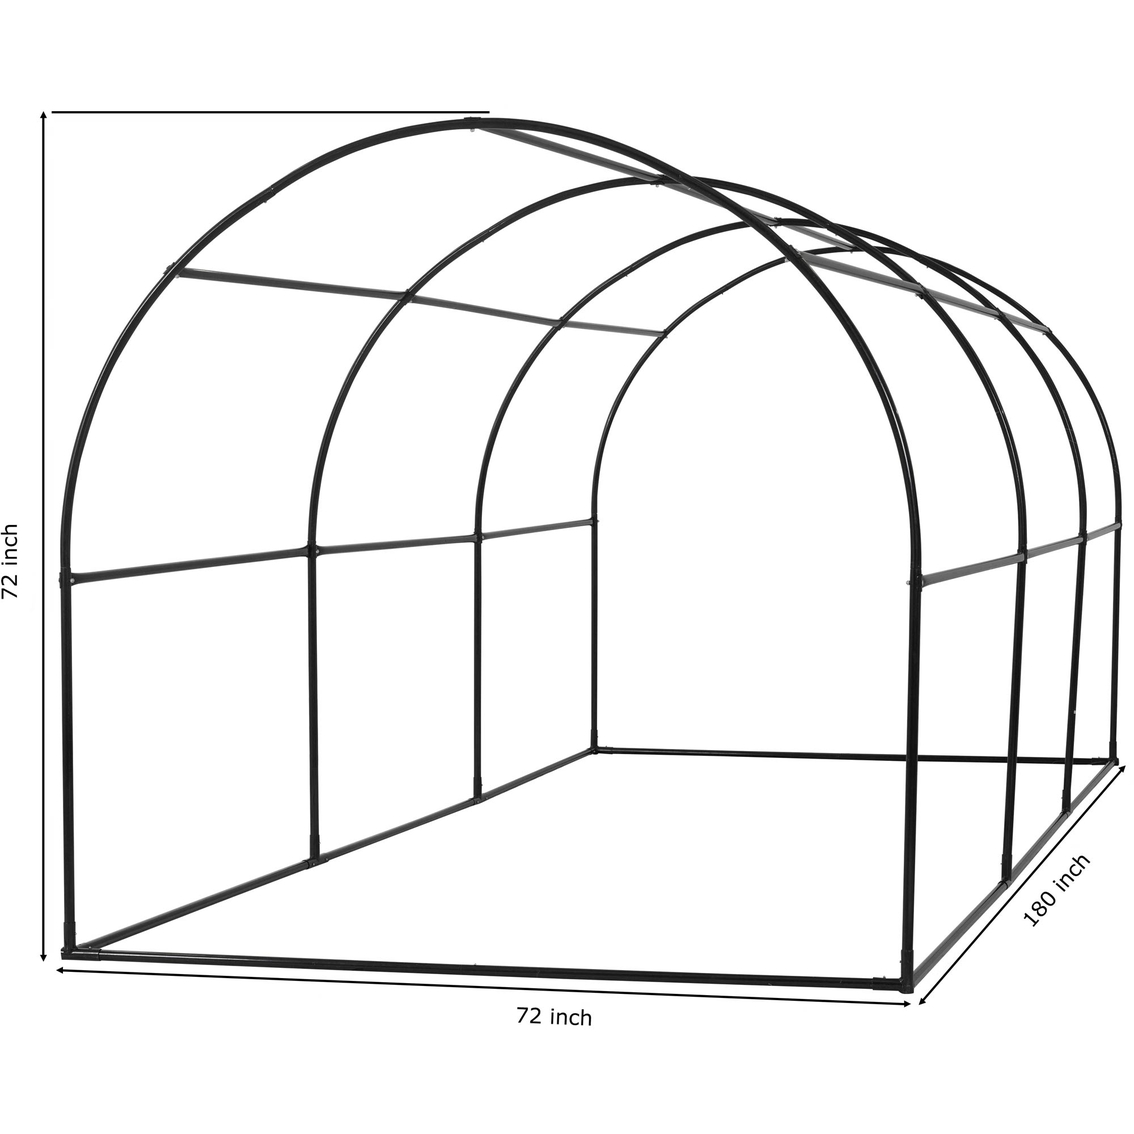 Ogrow Two Door Walk In Tunnel Greenhouse With Ventilation - Image 5 of 8